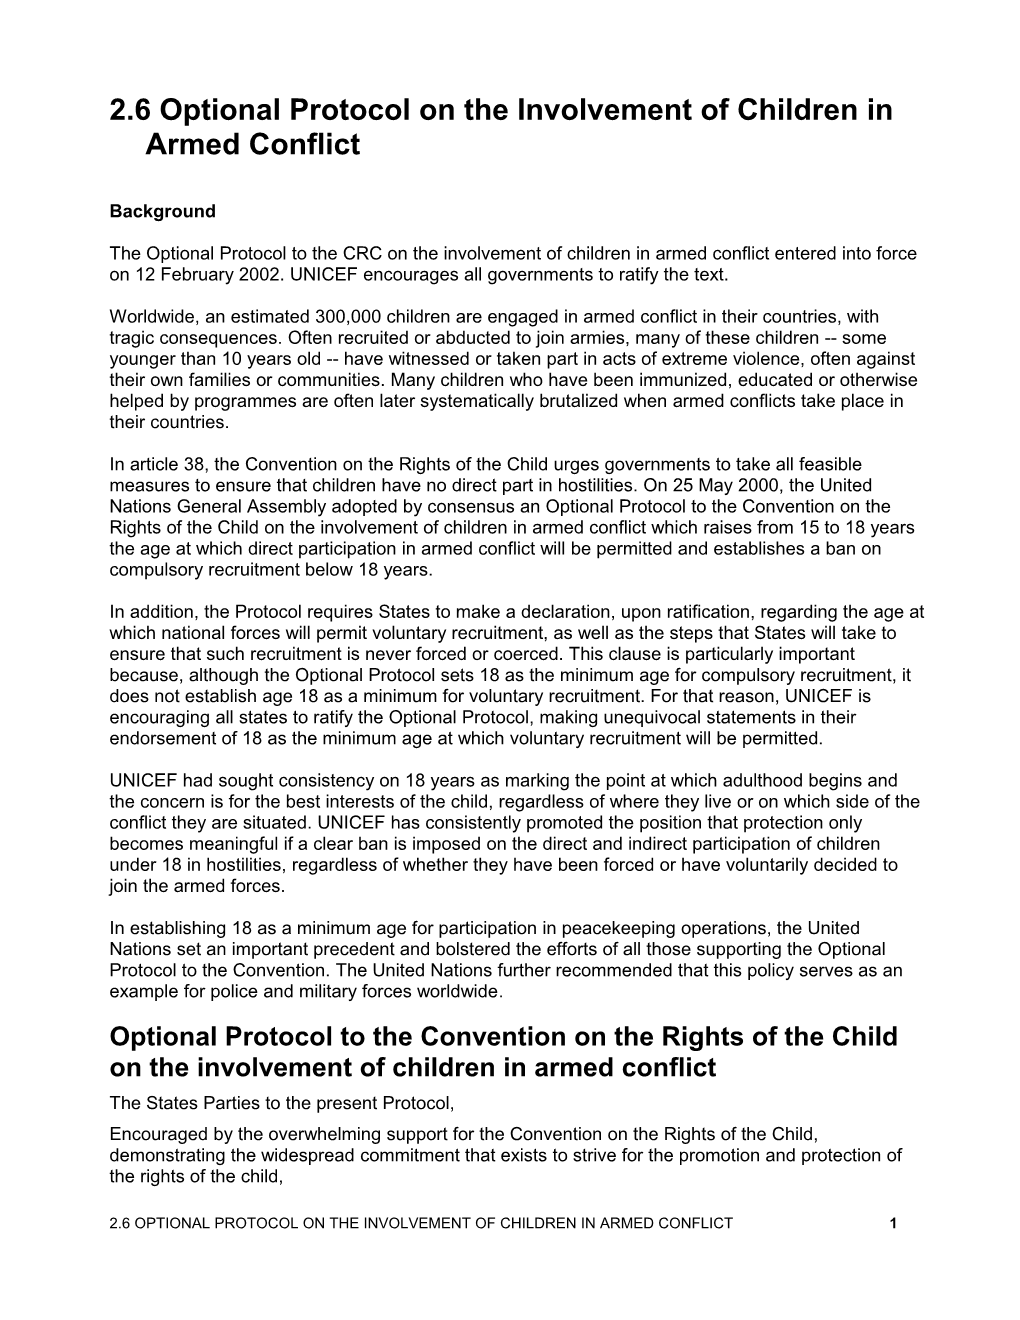 2.6 Optional Protocol on the Involvement Ofchildren in Armed Conflict